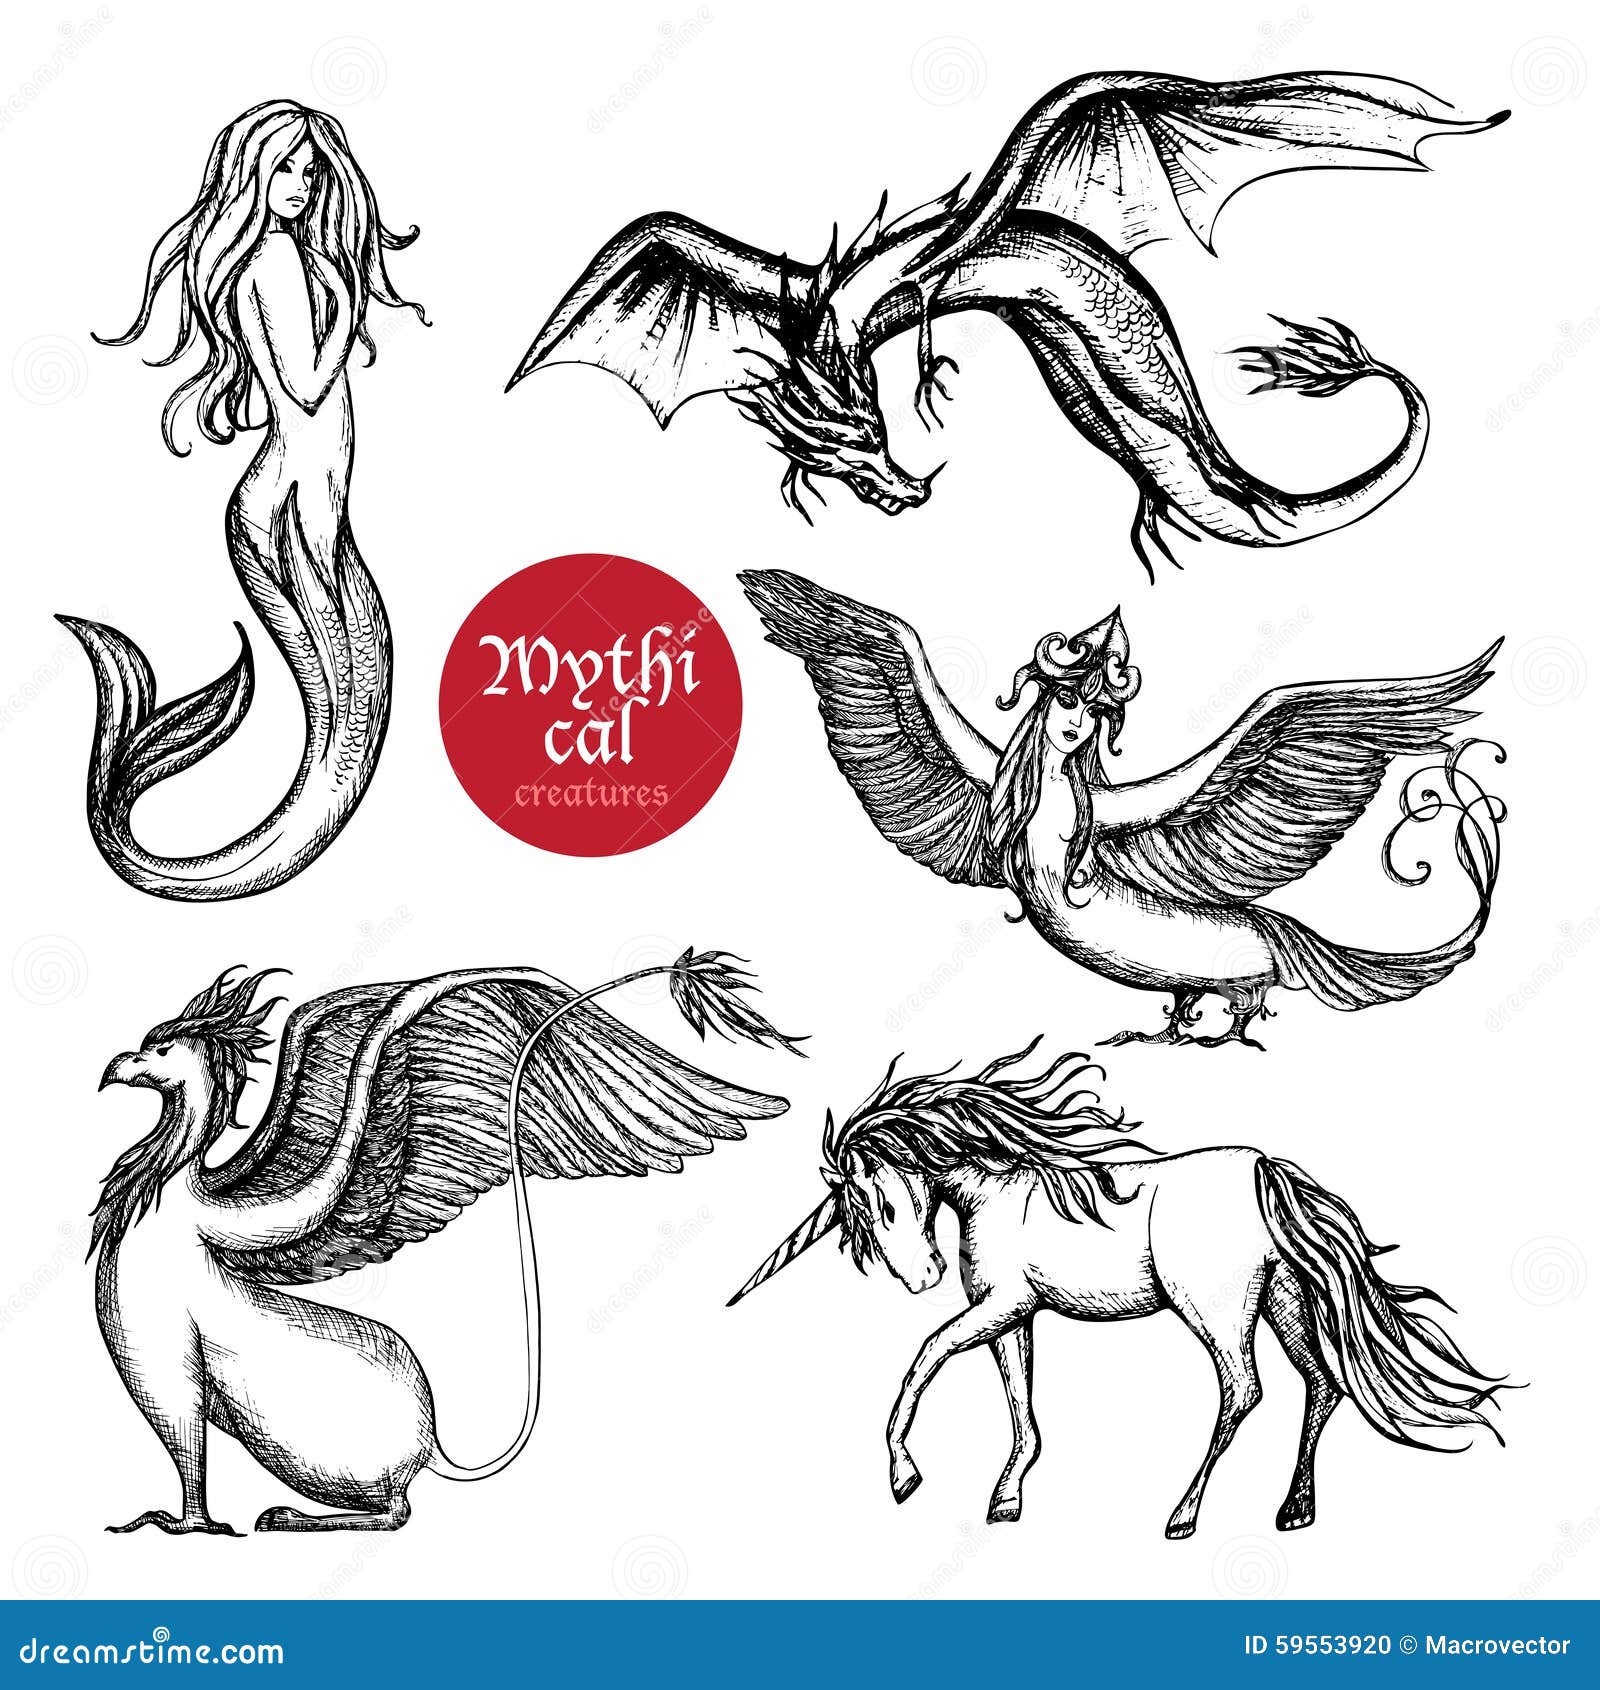 Mythical Creatures Hand Drawn Sketch Set Stock Vector - Image: 59553920